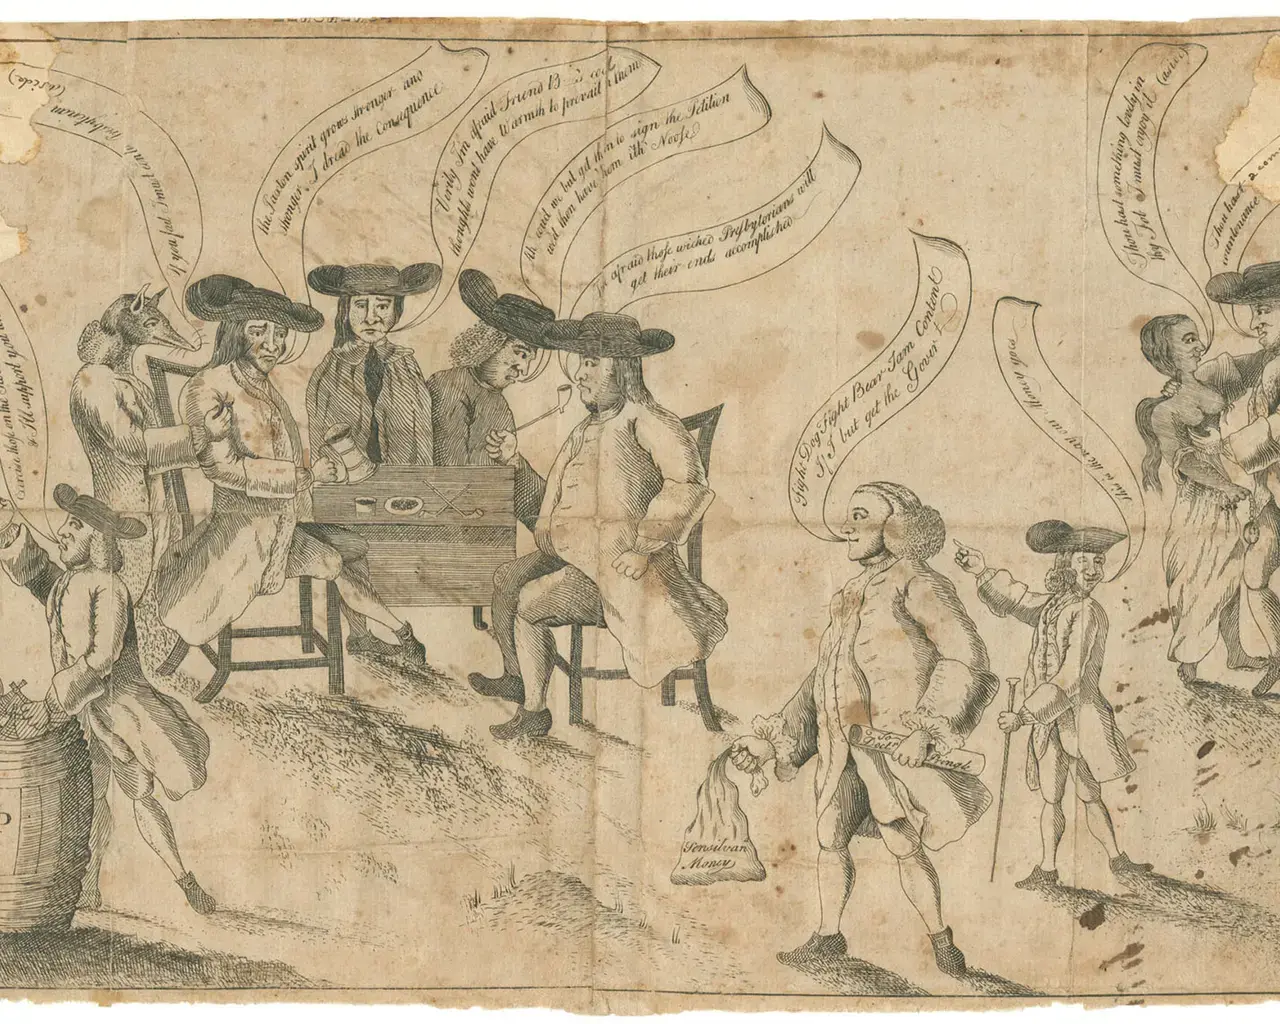 James Claypoole, Jr., "The Quakers and Franklin," 1764, etching, Philadelphia. Image courtesy of The Library Company of Philadelphia.